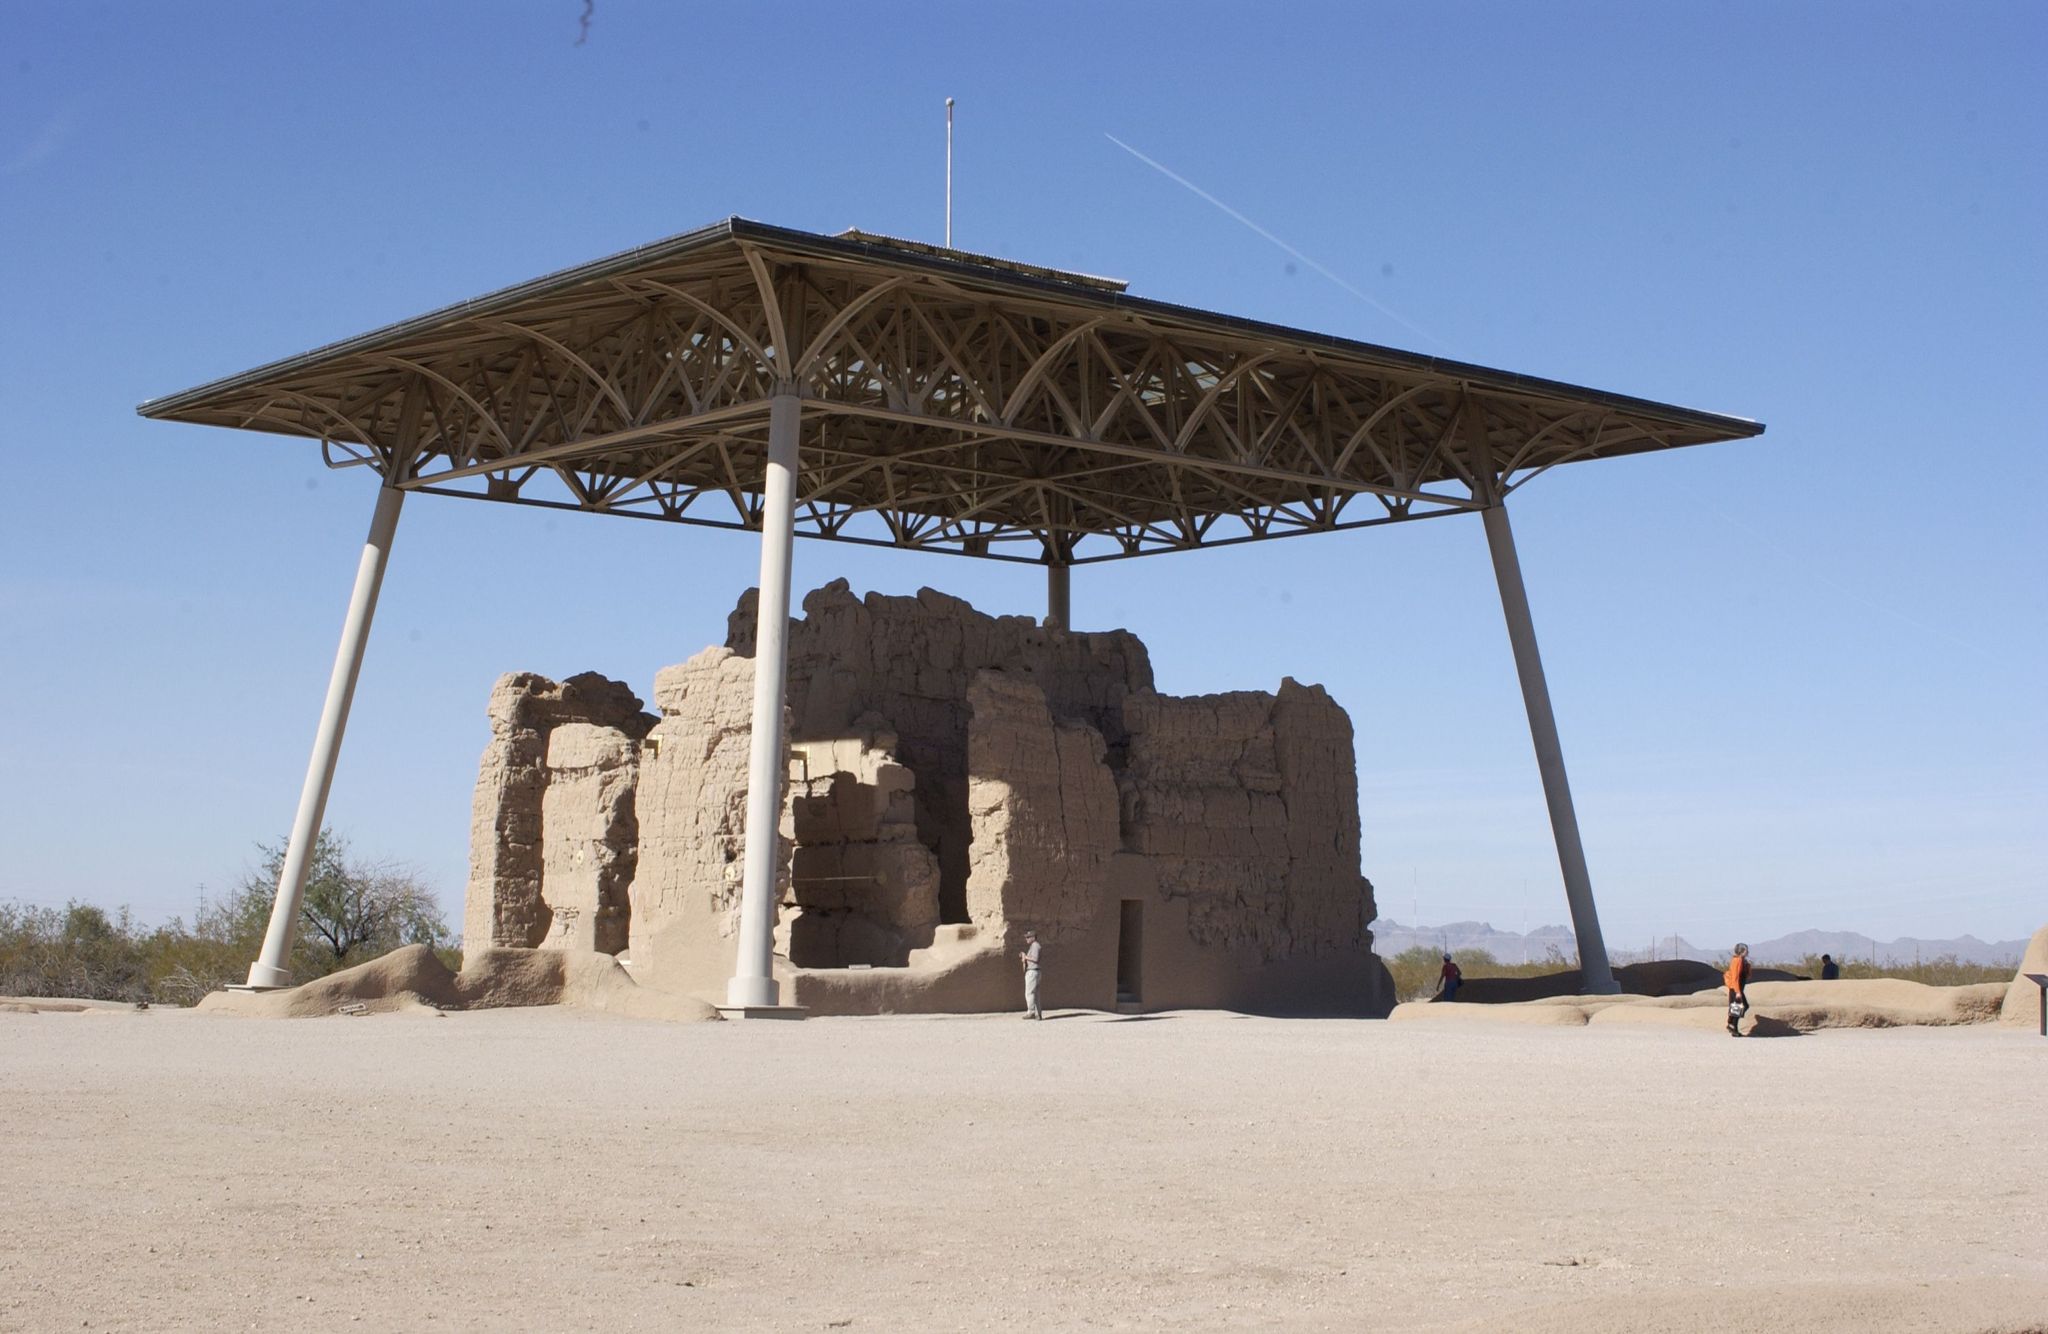 The Great House at Casa Grande Ruins has existed for over 600 years.